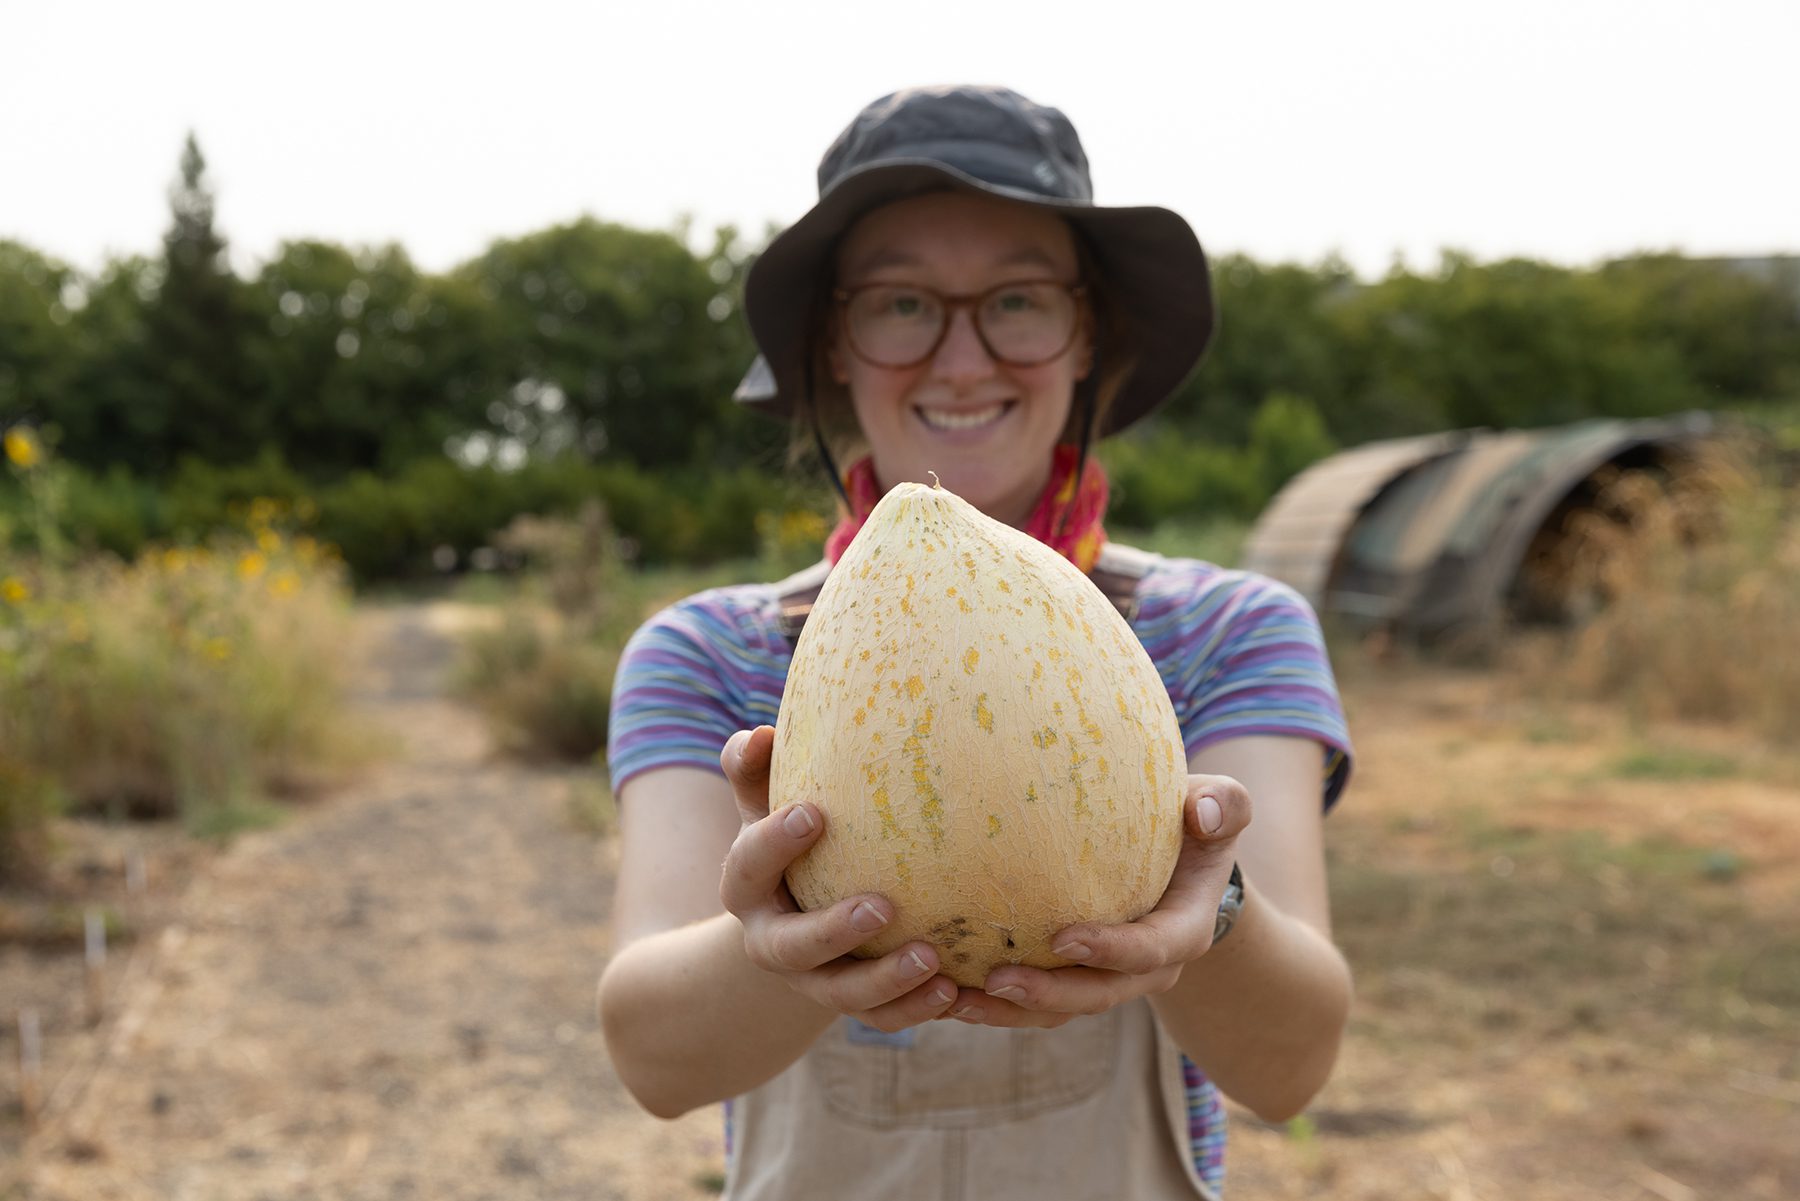 A Sierra Nevada employee holding out a melon harvested from the brewery garden